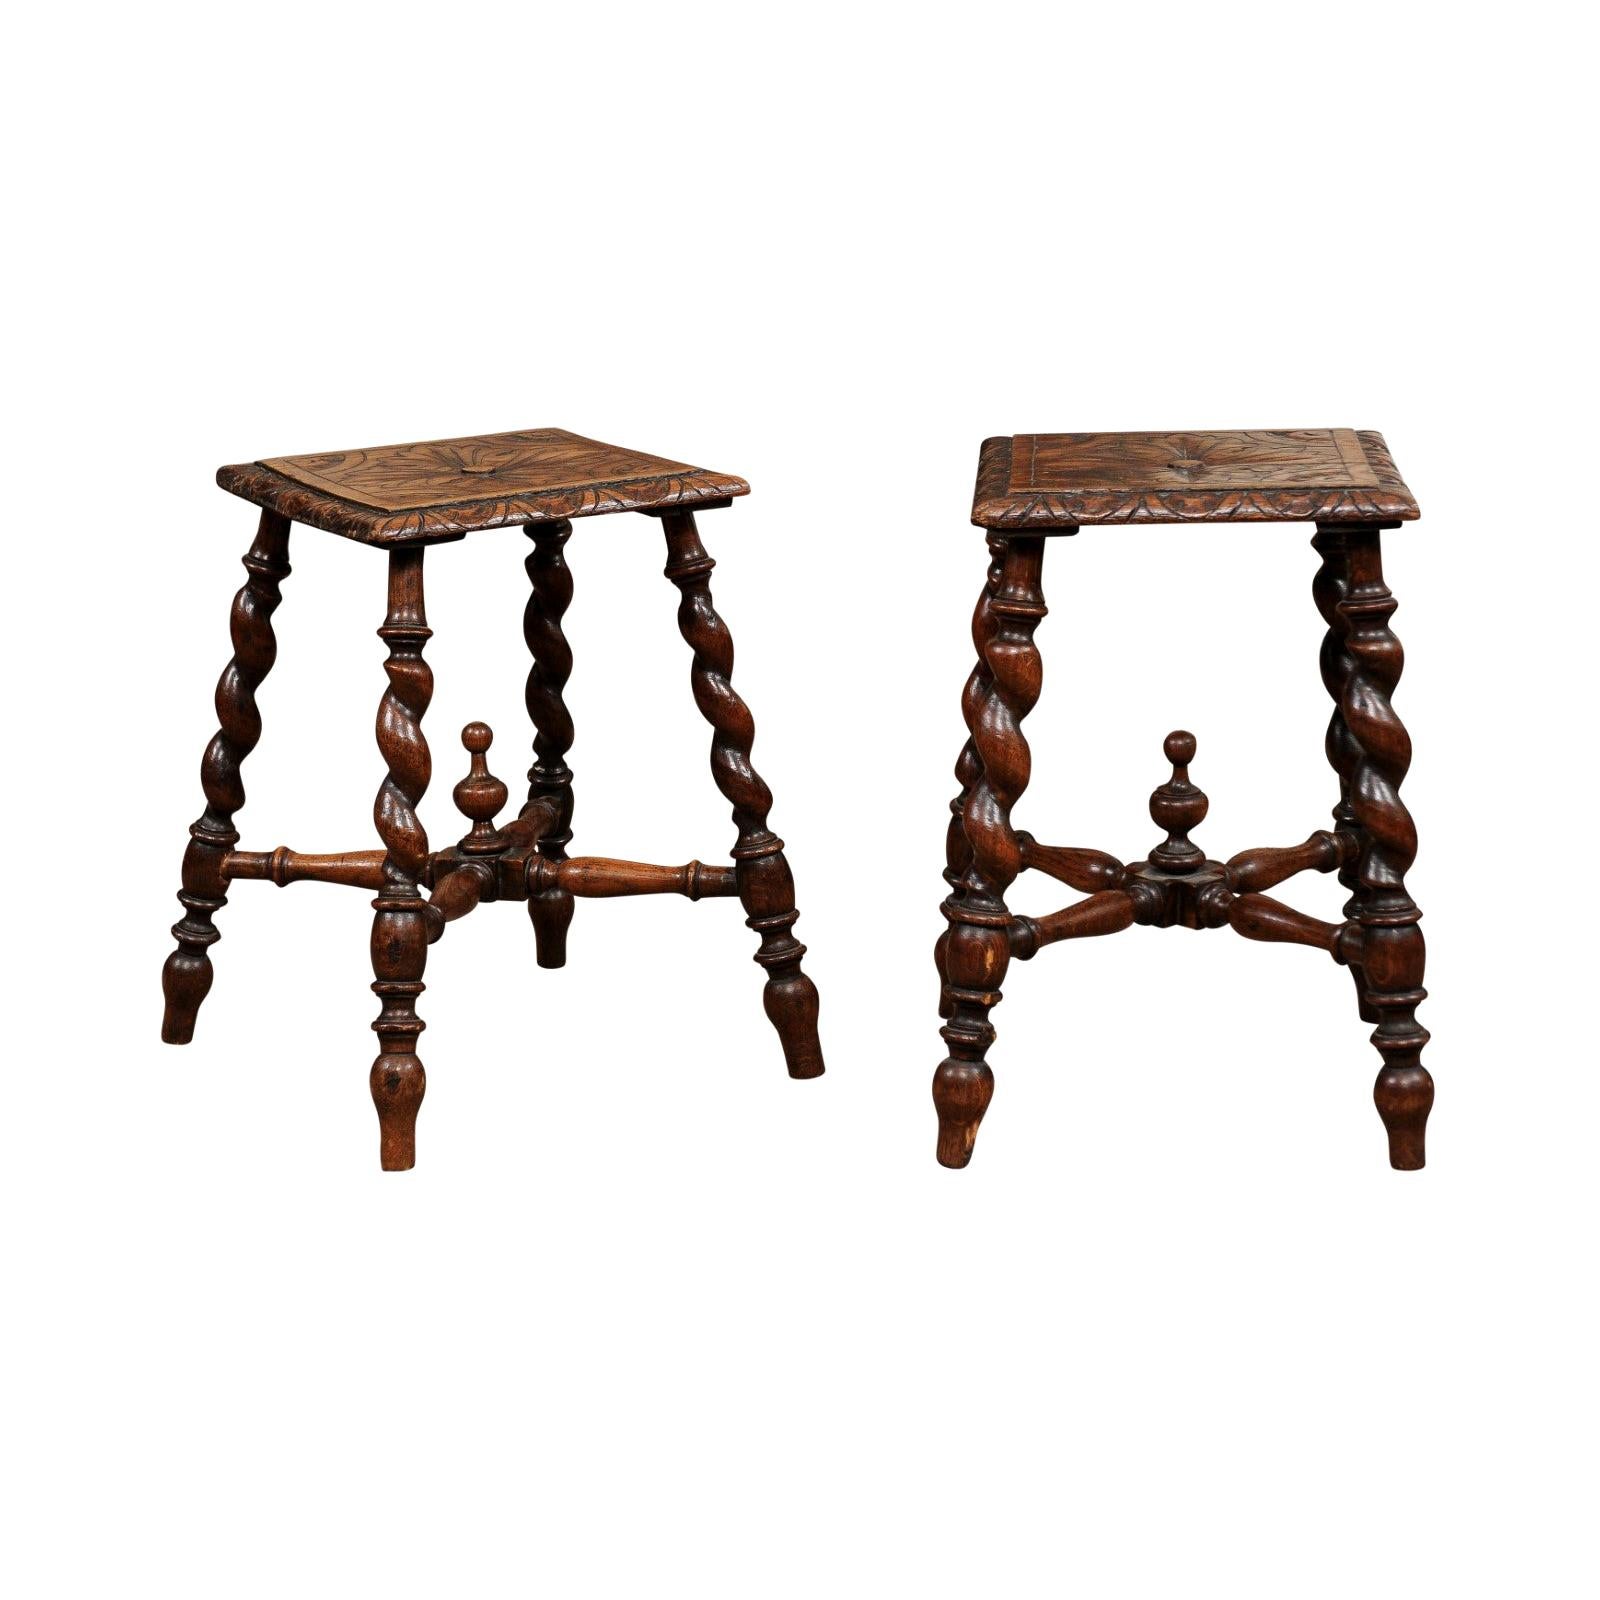 Pair of Jacobean Style Carved Oak Barley Twist Stools, Early 19th Century